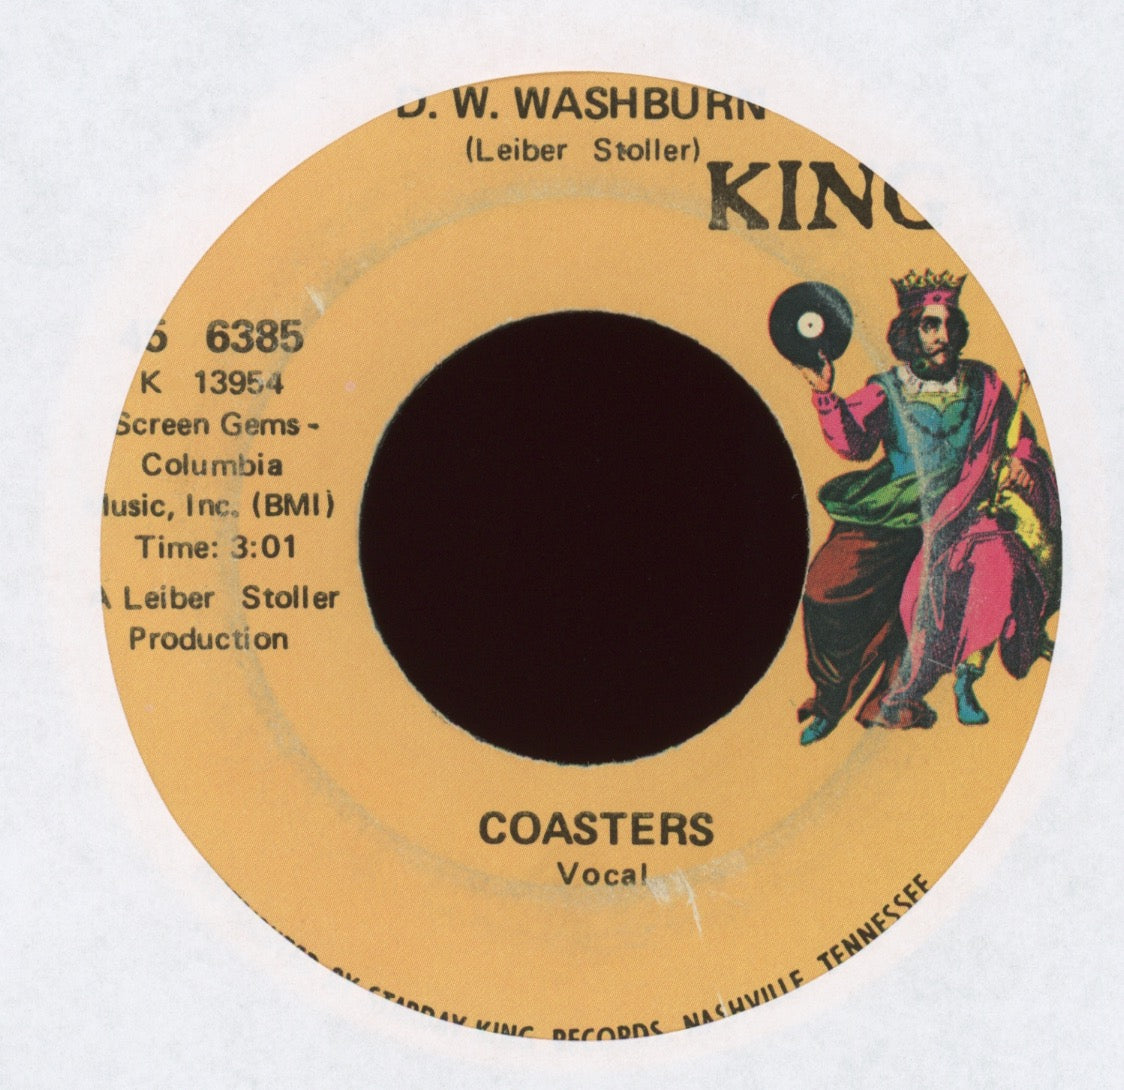 The Coasters - Love Potion Number Nine on King